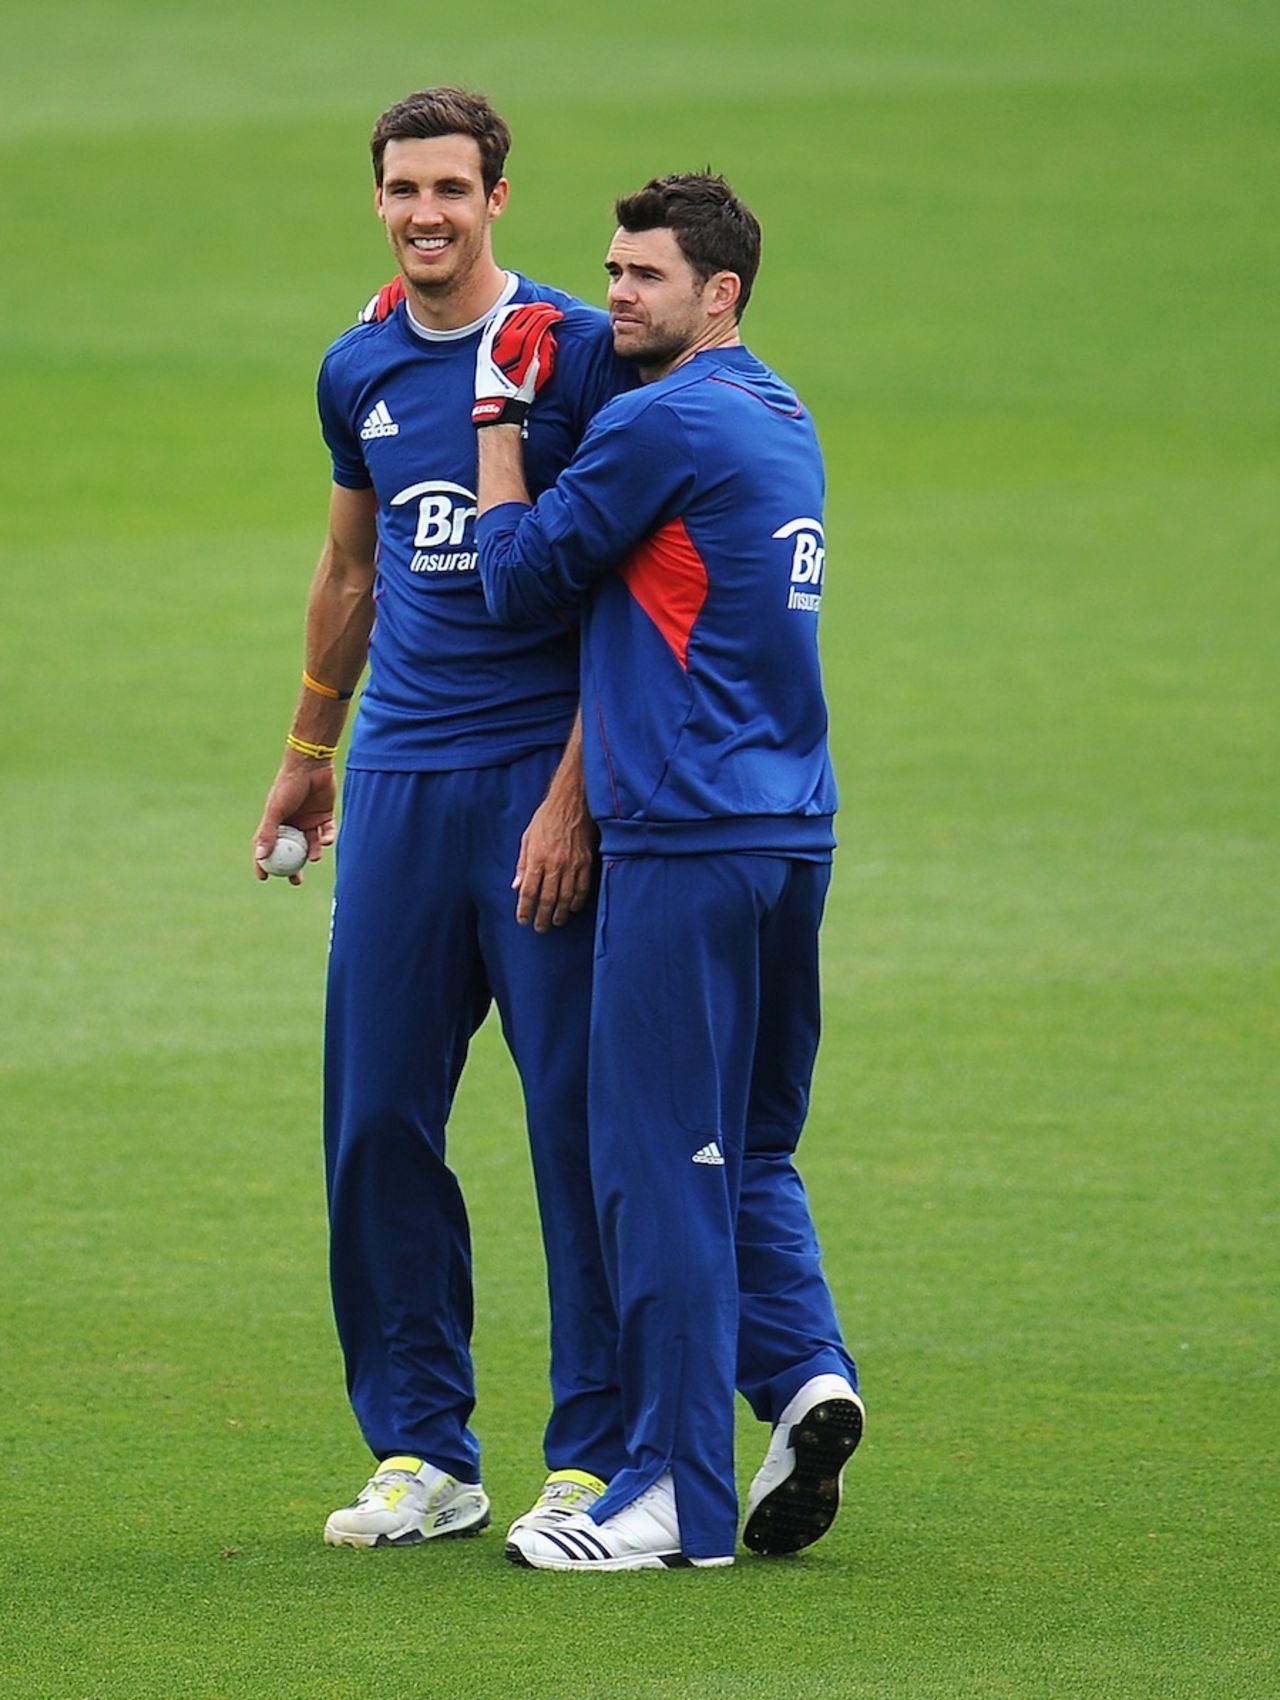 Steven Finn and James Anderson during a training session, The Oval, June 12, 2013